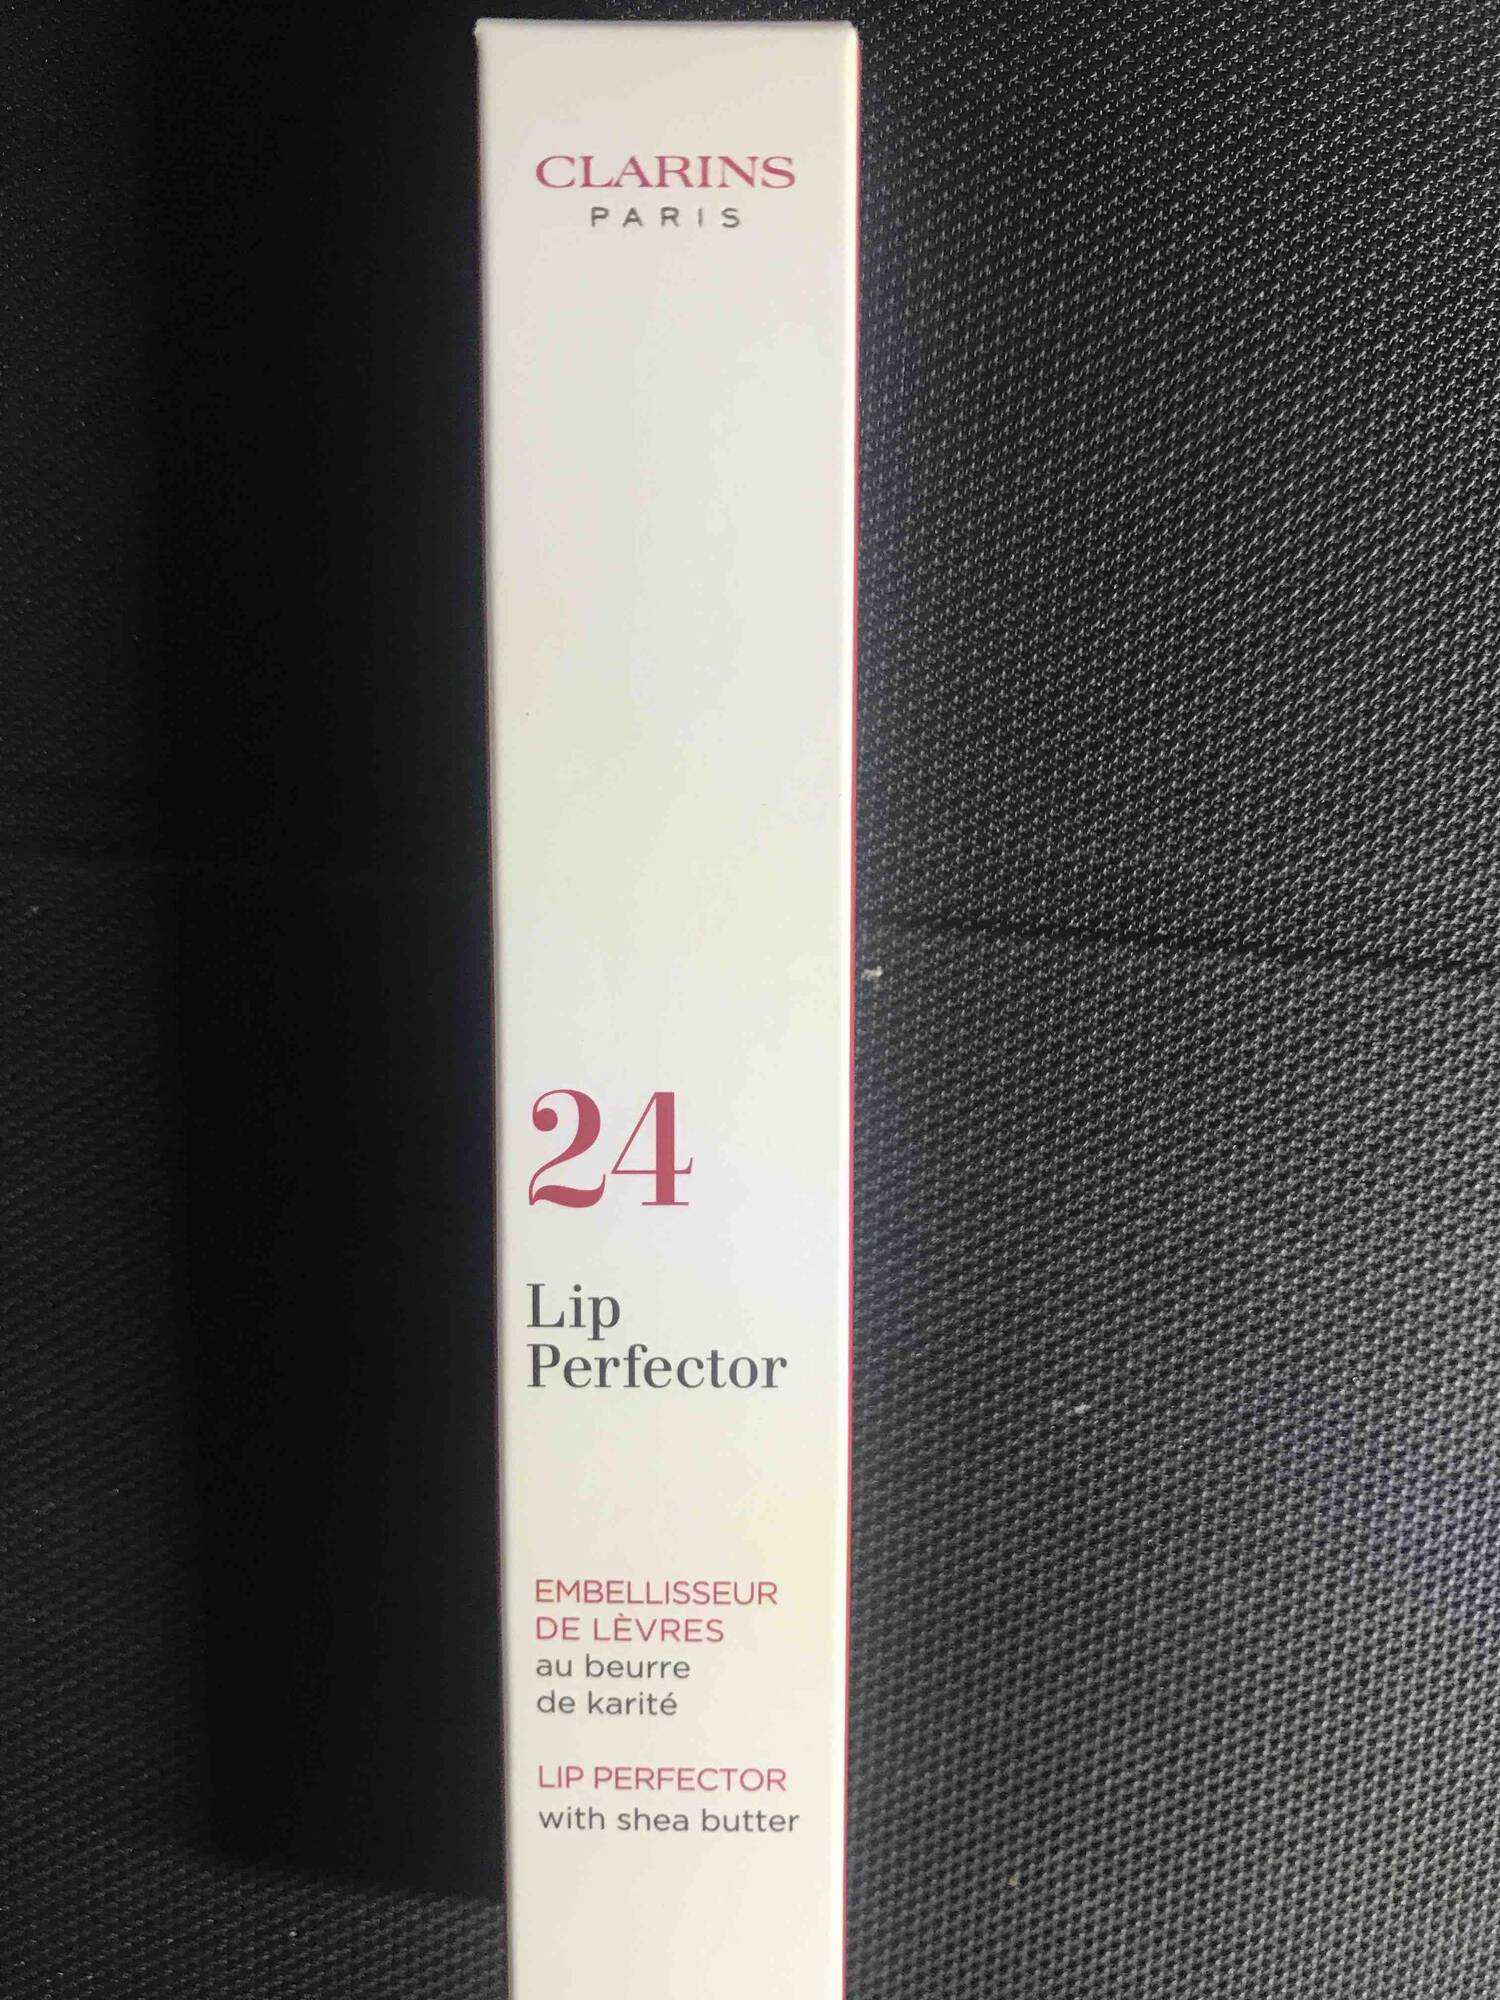 CLARINS PARIS - LIP PERFECTOR WITH SHEA BUTTER